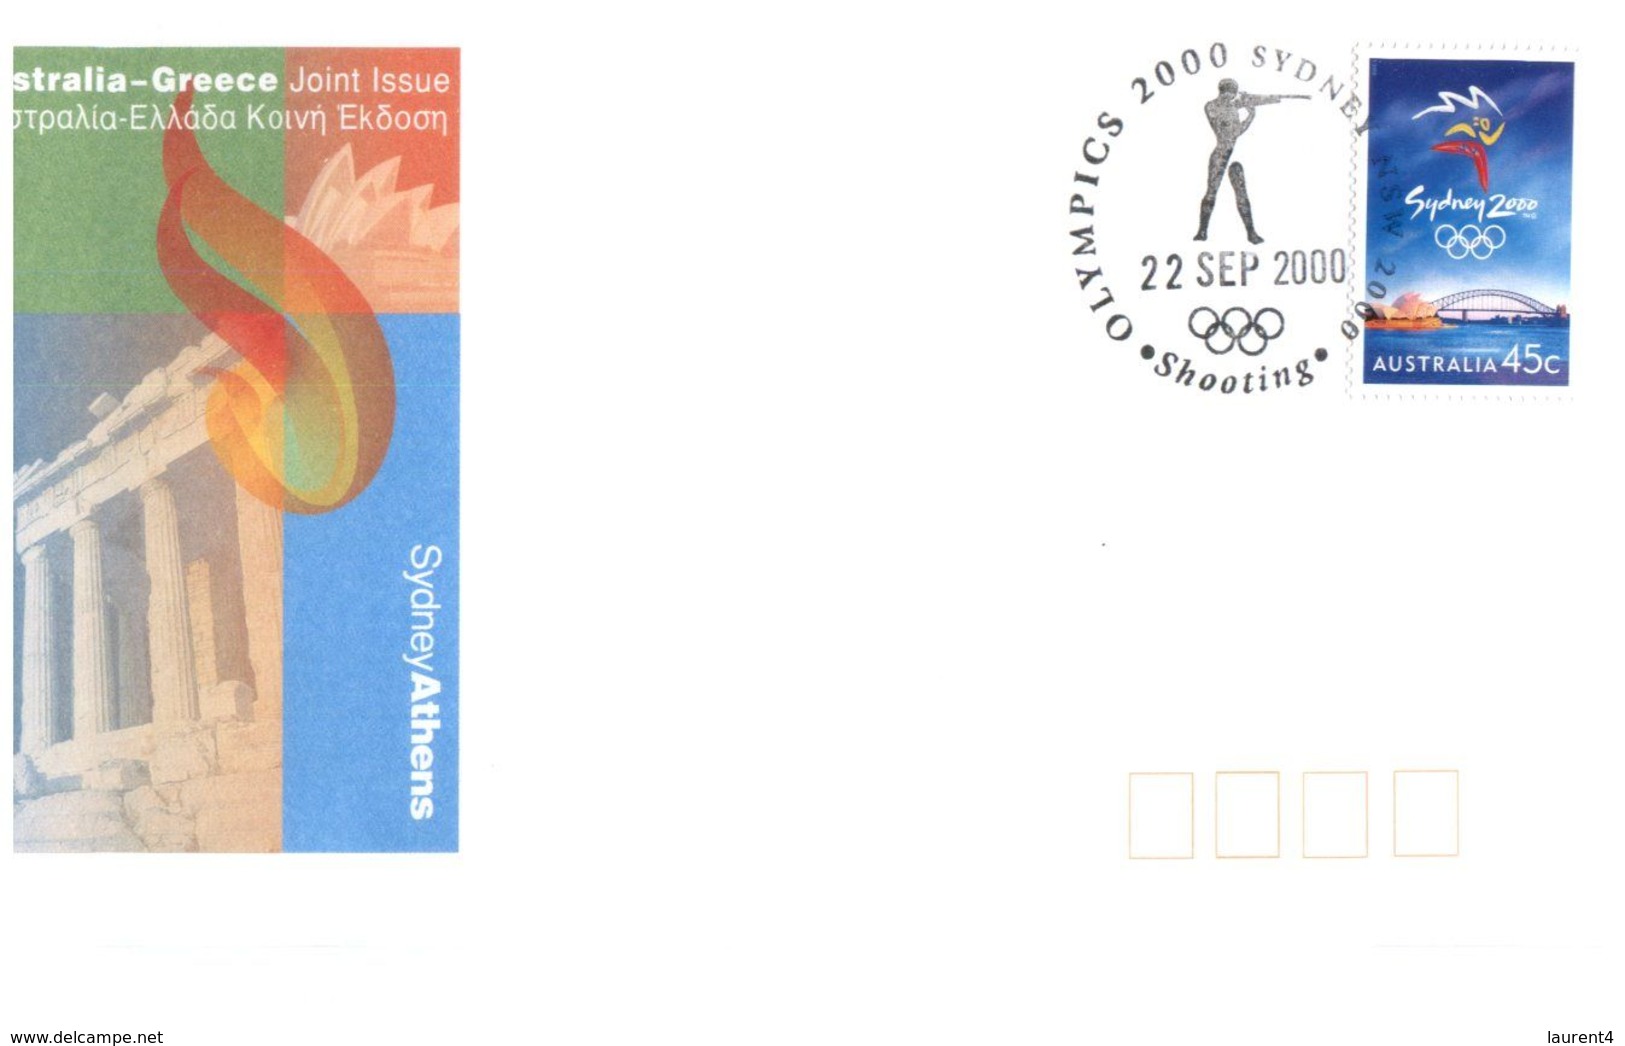 (C 4) Australia - 2000 Olympic Games - set of 13 sports cancelled on 22 September 2000